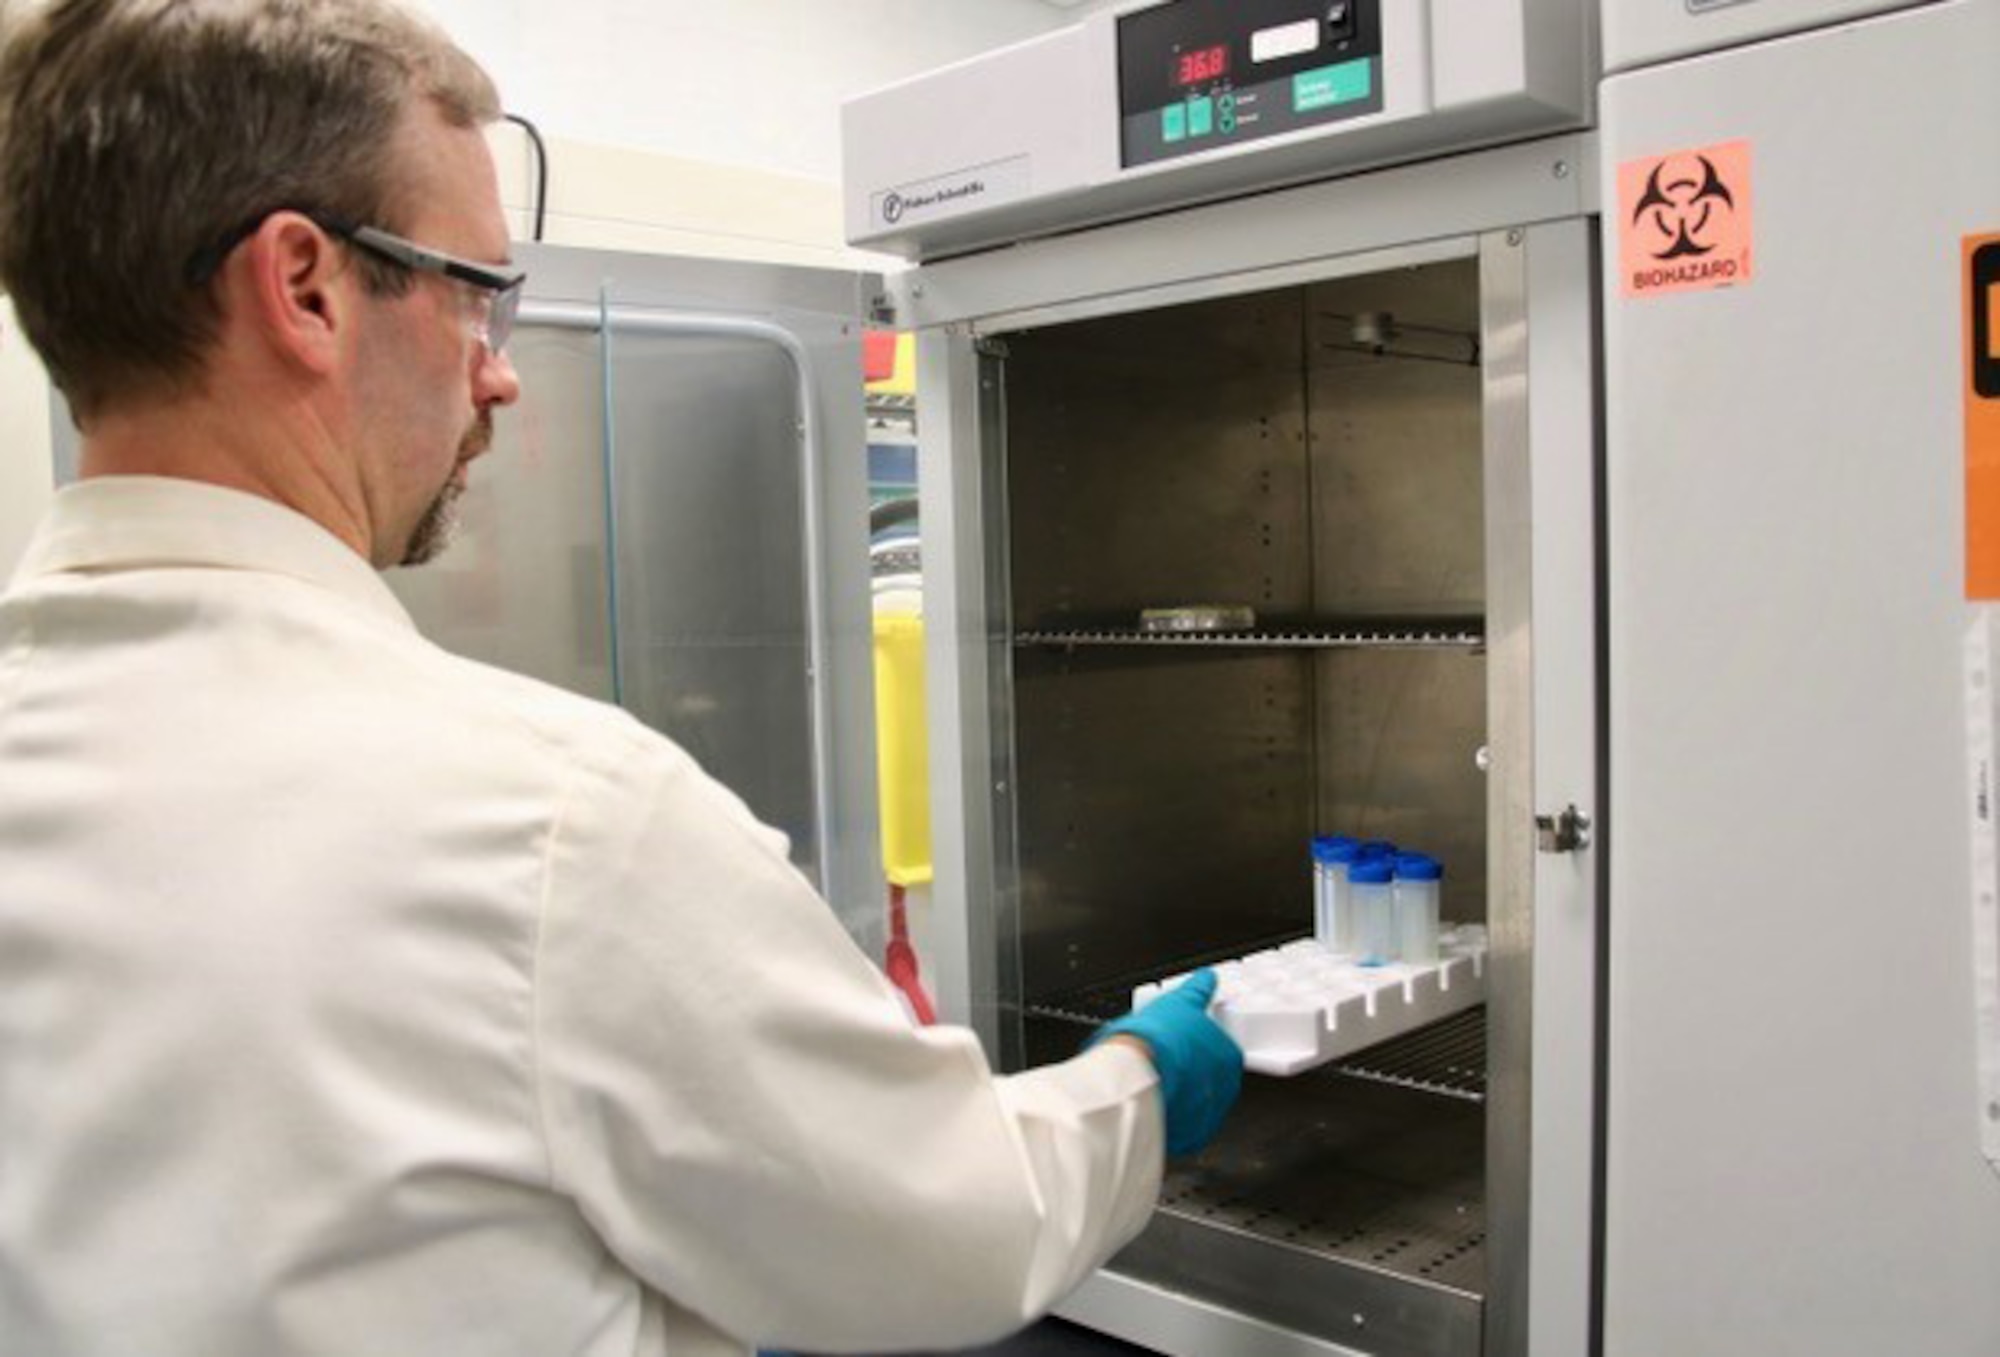 Bruce Salter, a senior research scientist at the Air Force Civil Engineer Center, works on non-toxic, anti-microbial compounds.